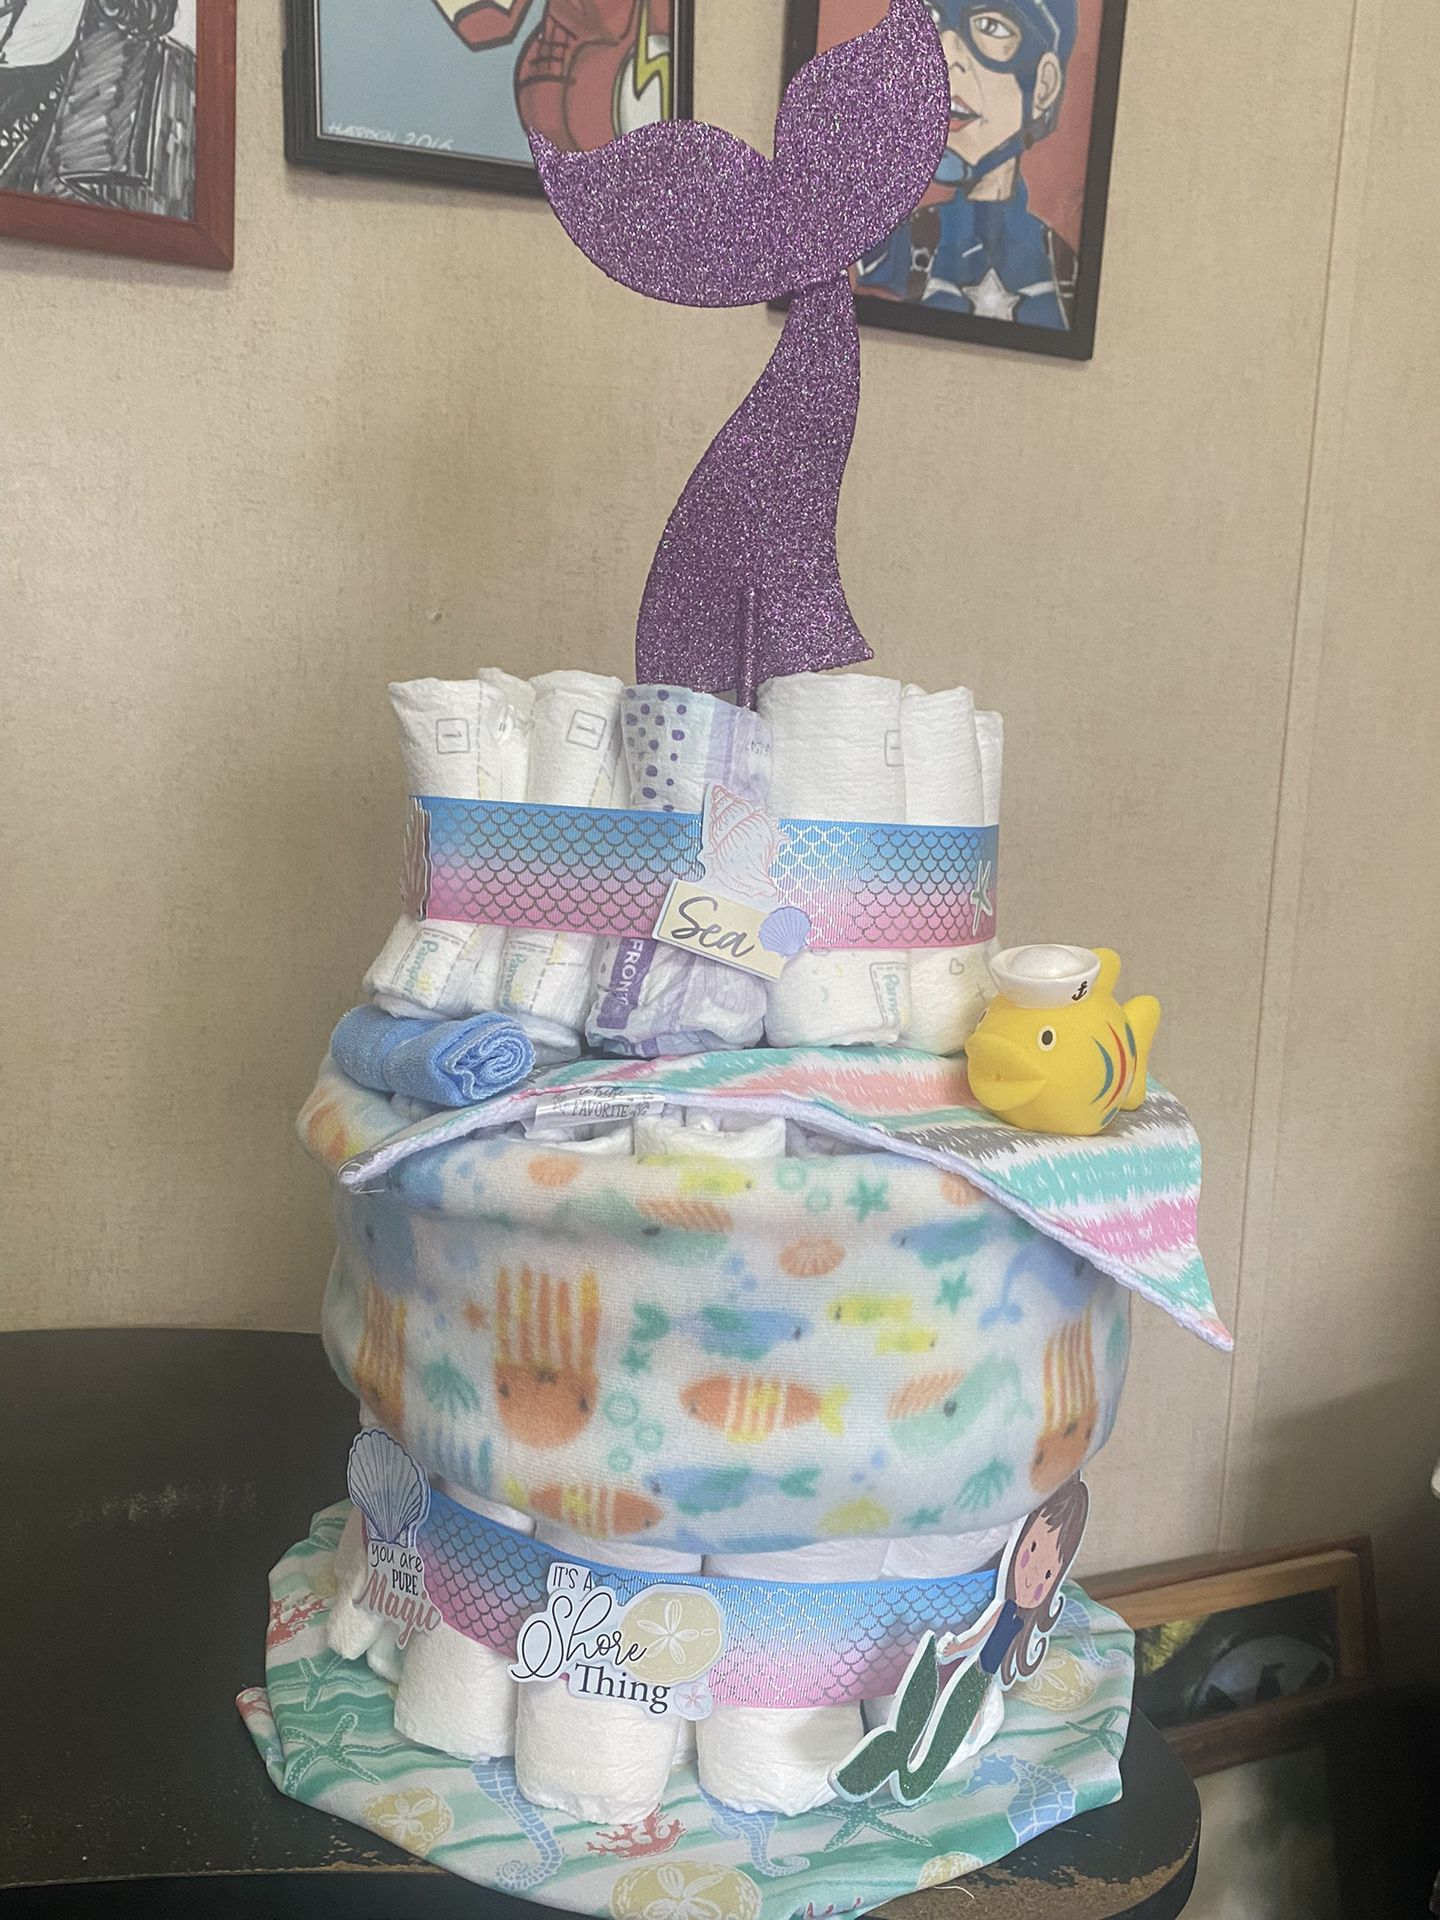 New Diaper Cakes $40 Each Firm Price 